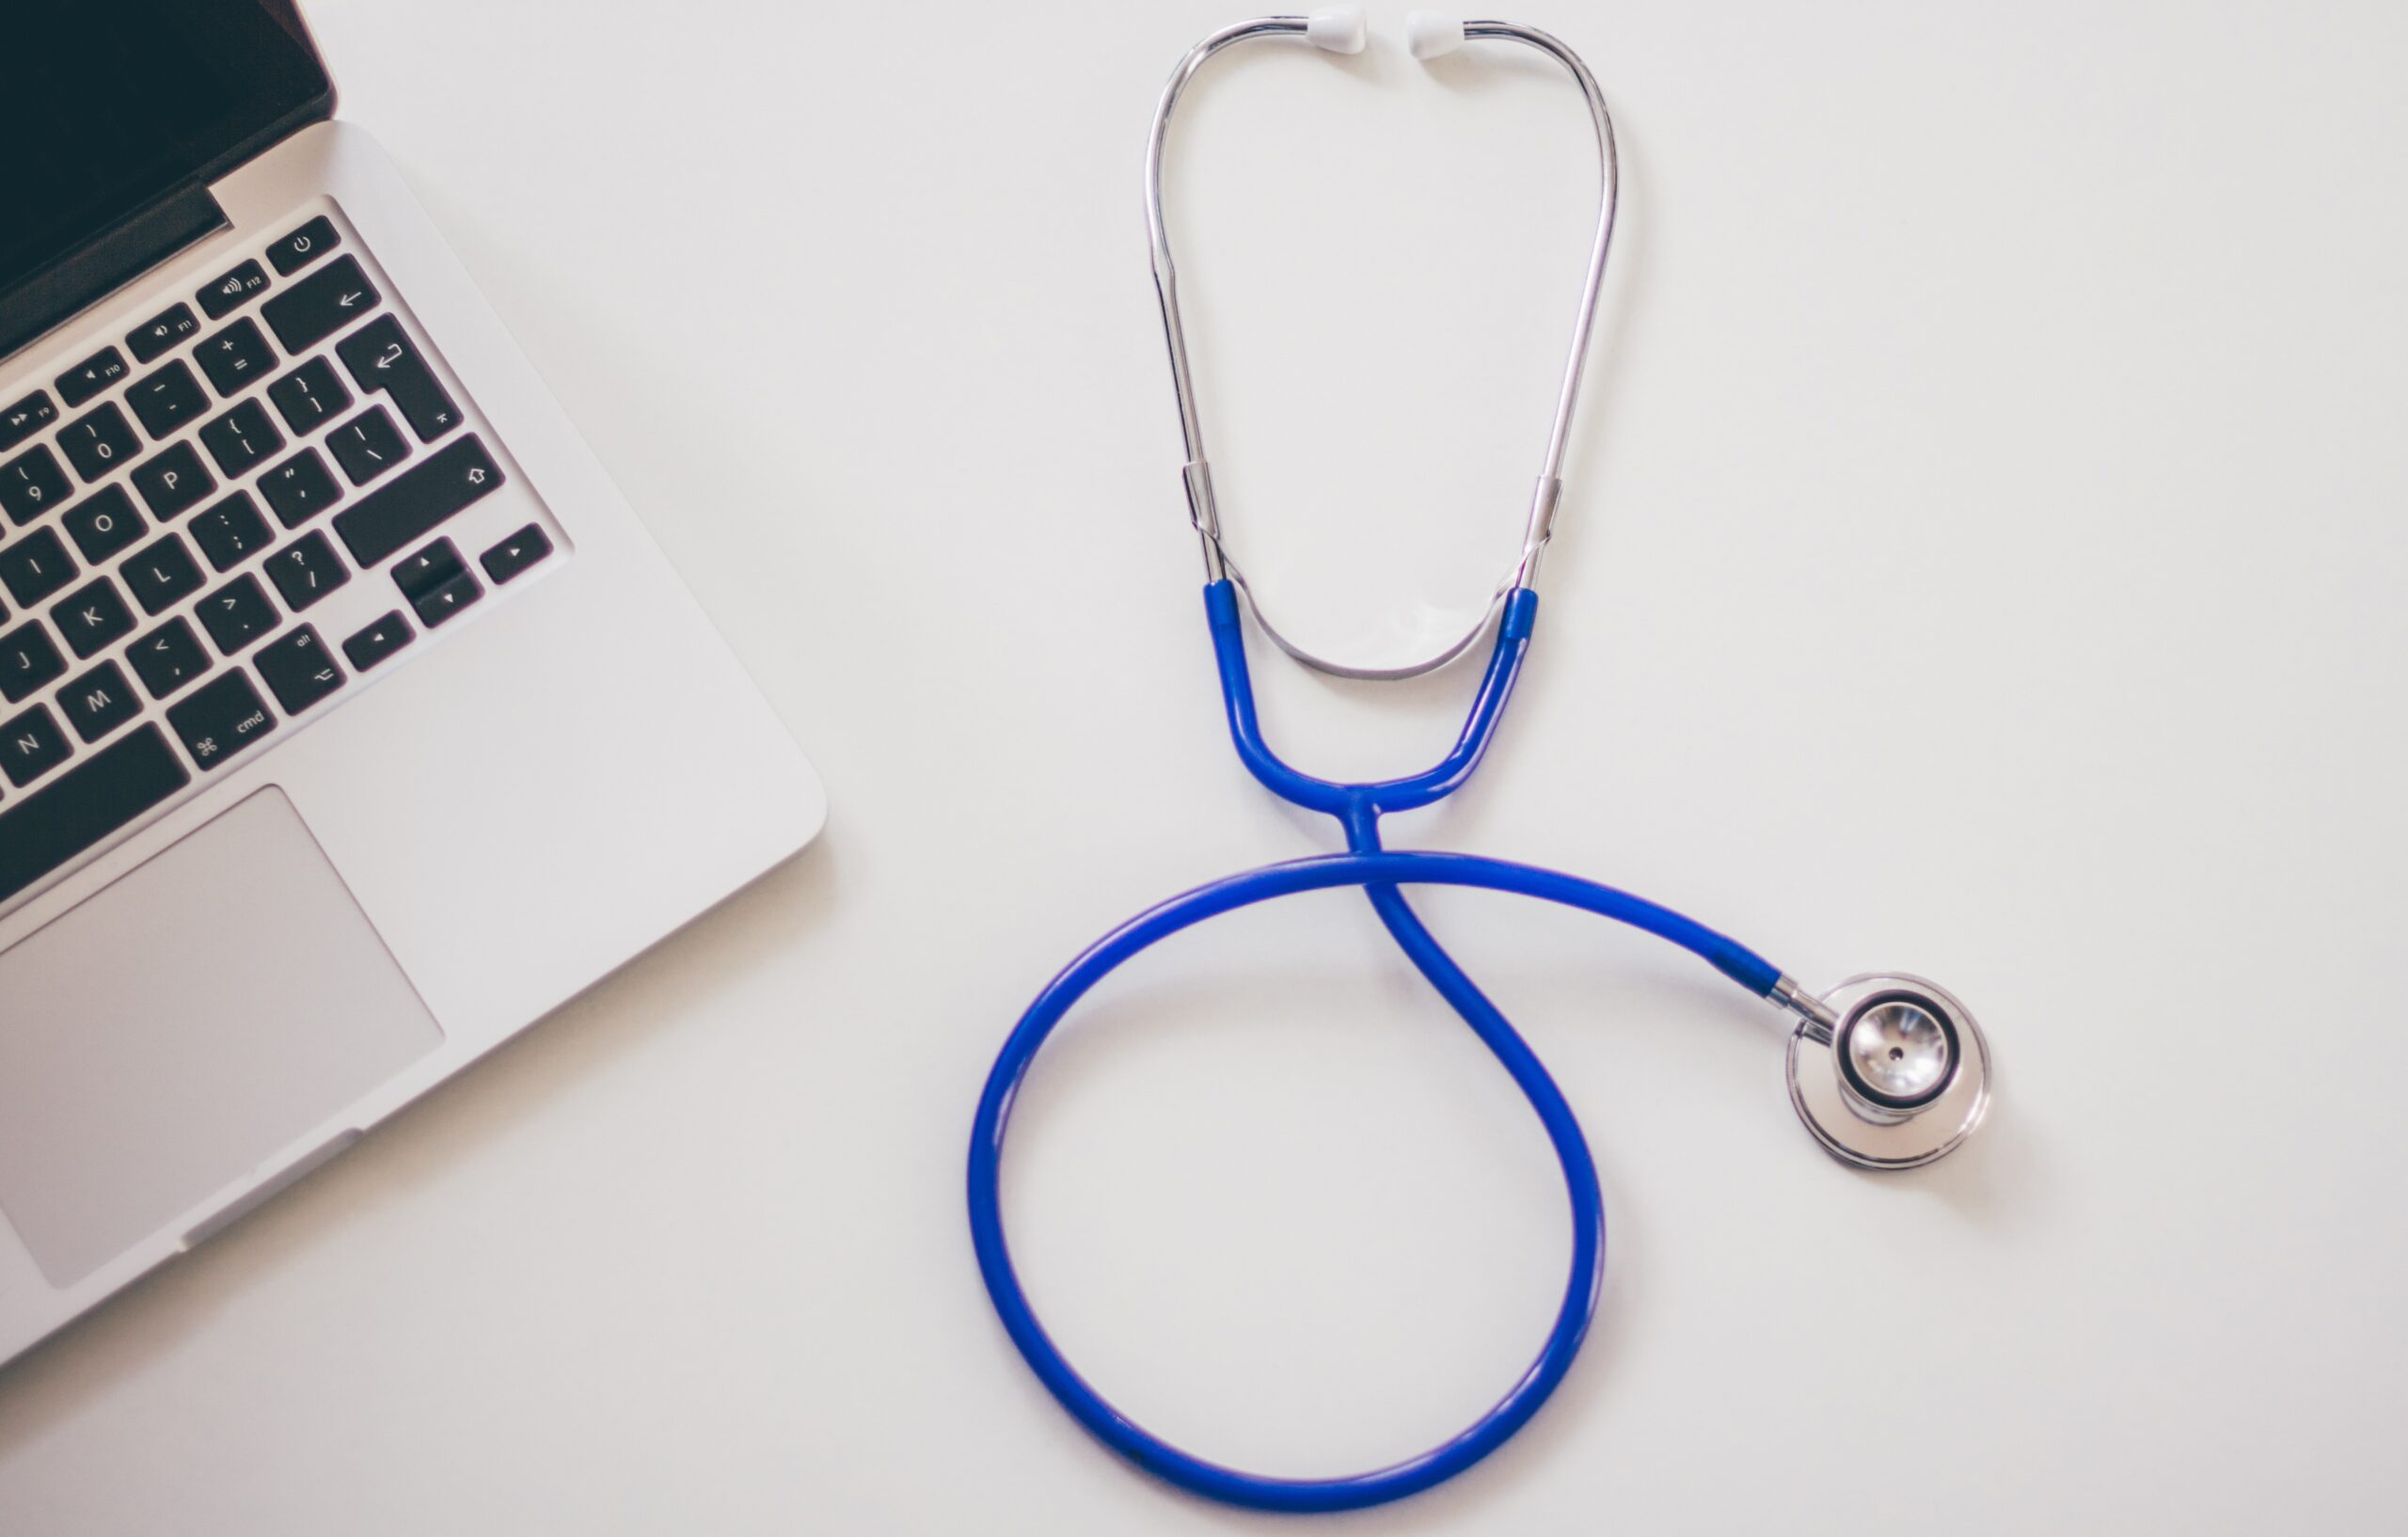 GP surgeries have six months to offer online registration